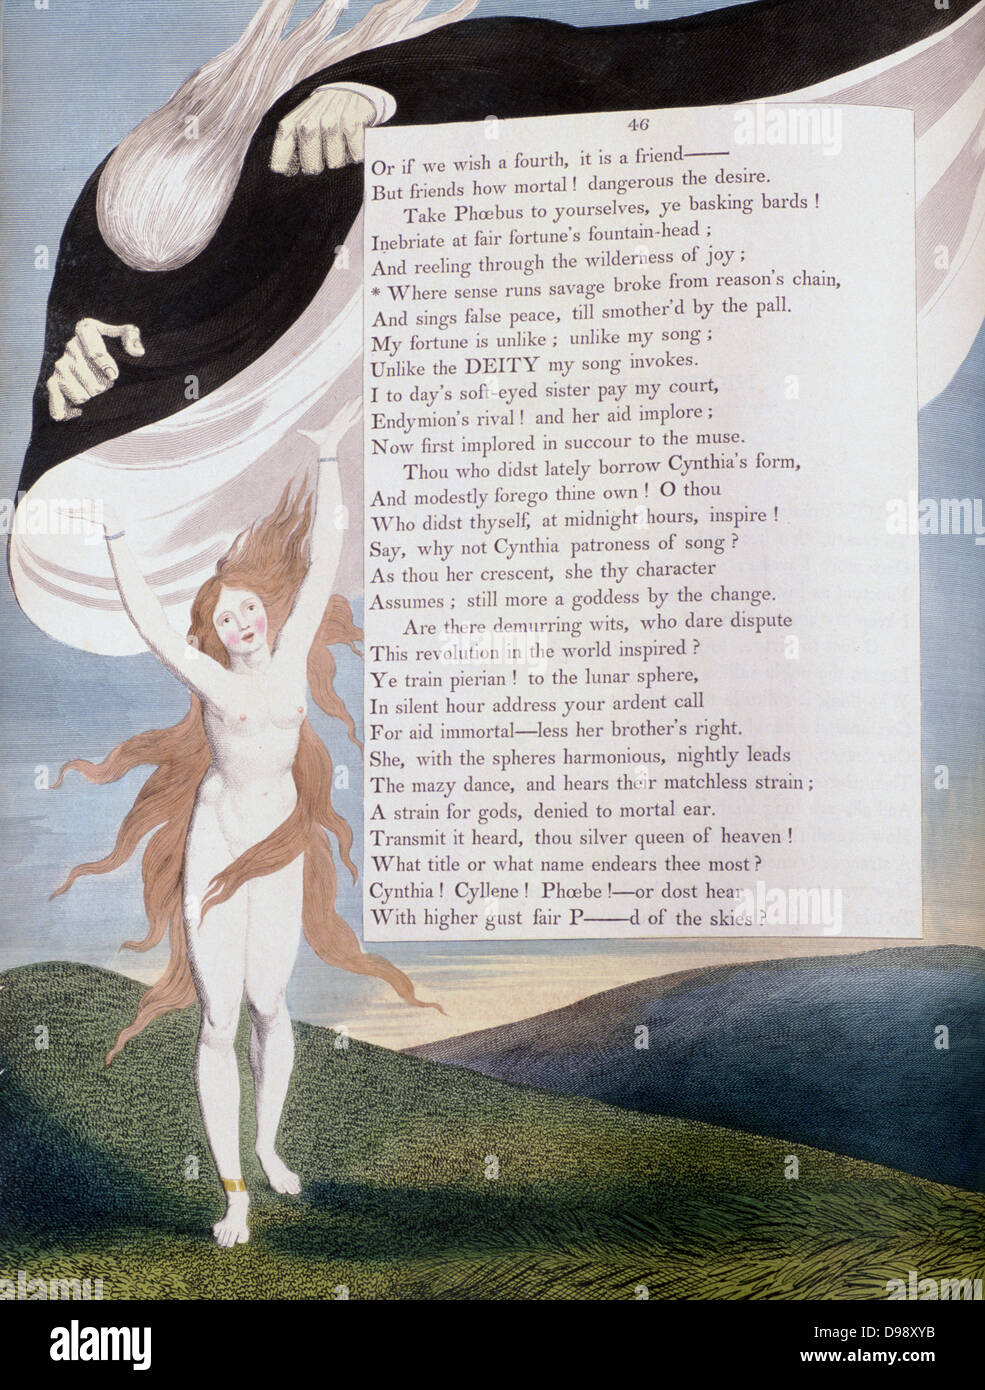 Illustration by William Blake (1757-1827) English poet, painter and printmaker, for Edward Young's (1681-1765) poem 'Night Thoughts' published 1742-1745. Stock Photo